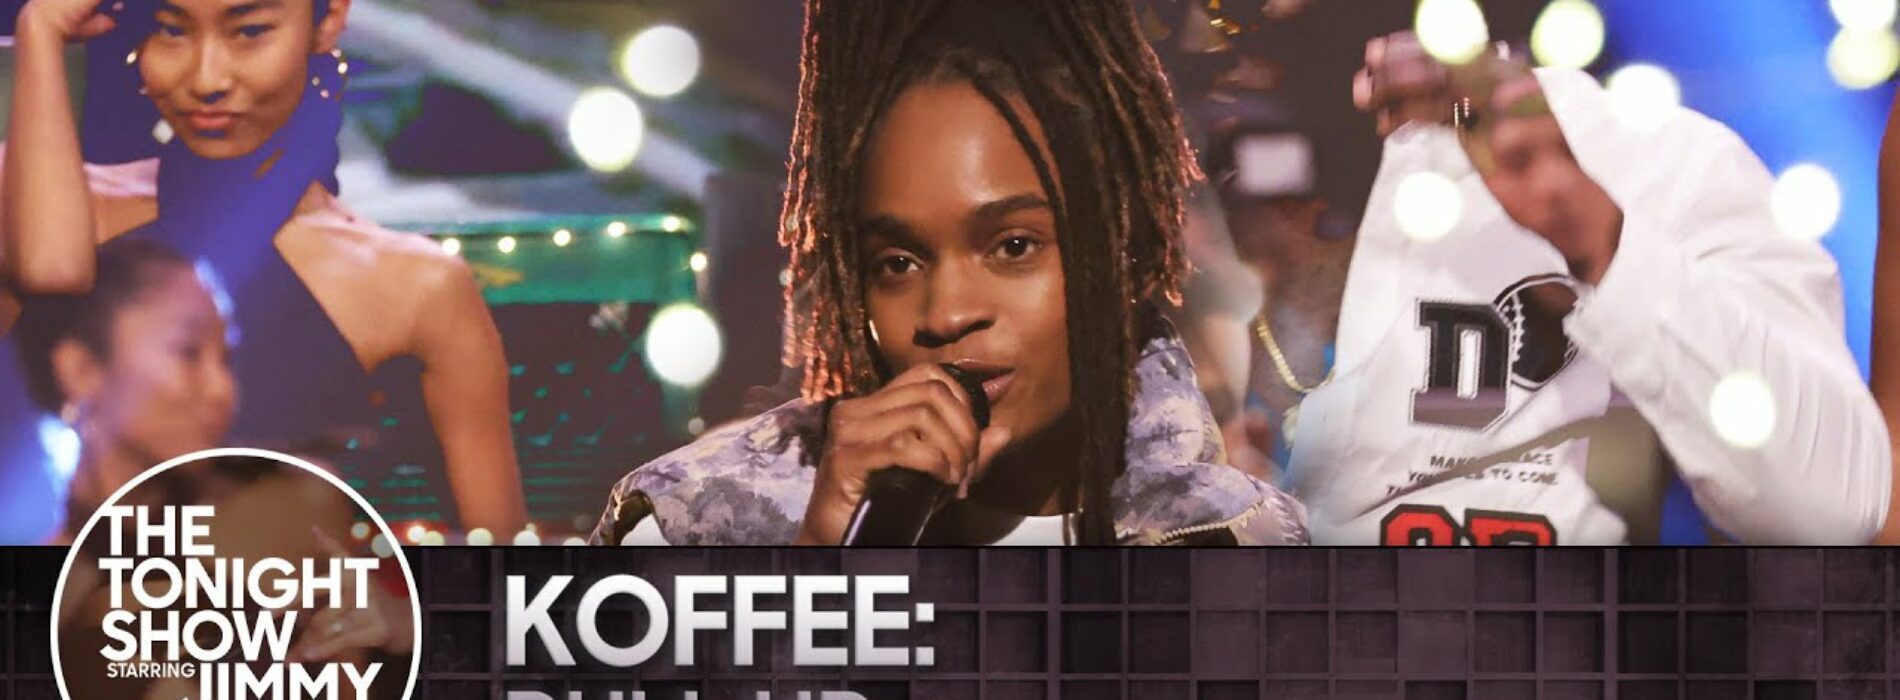 Koffee – Pull Up (from the tonight show) – Mars 2022❤️🇺🇸🇯🇲.